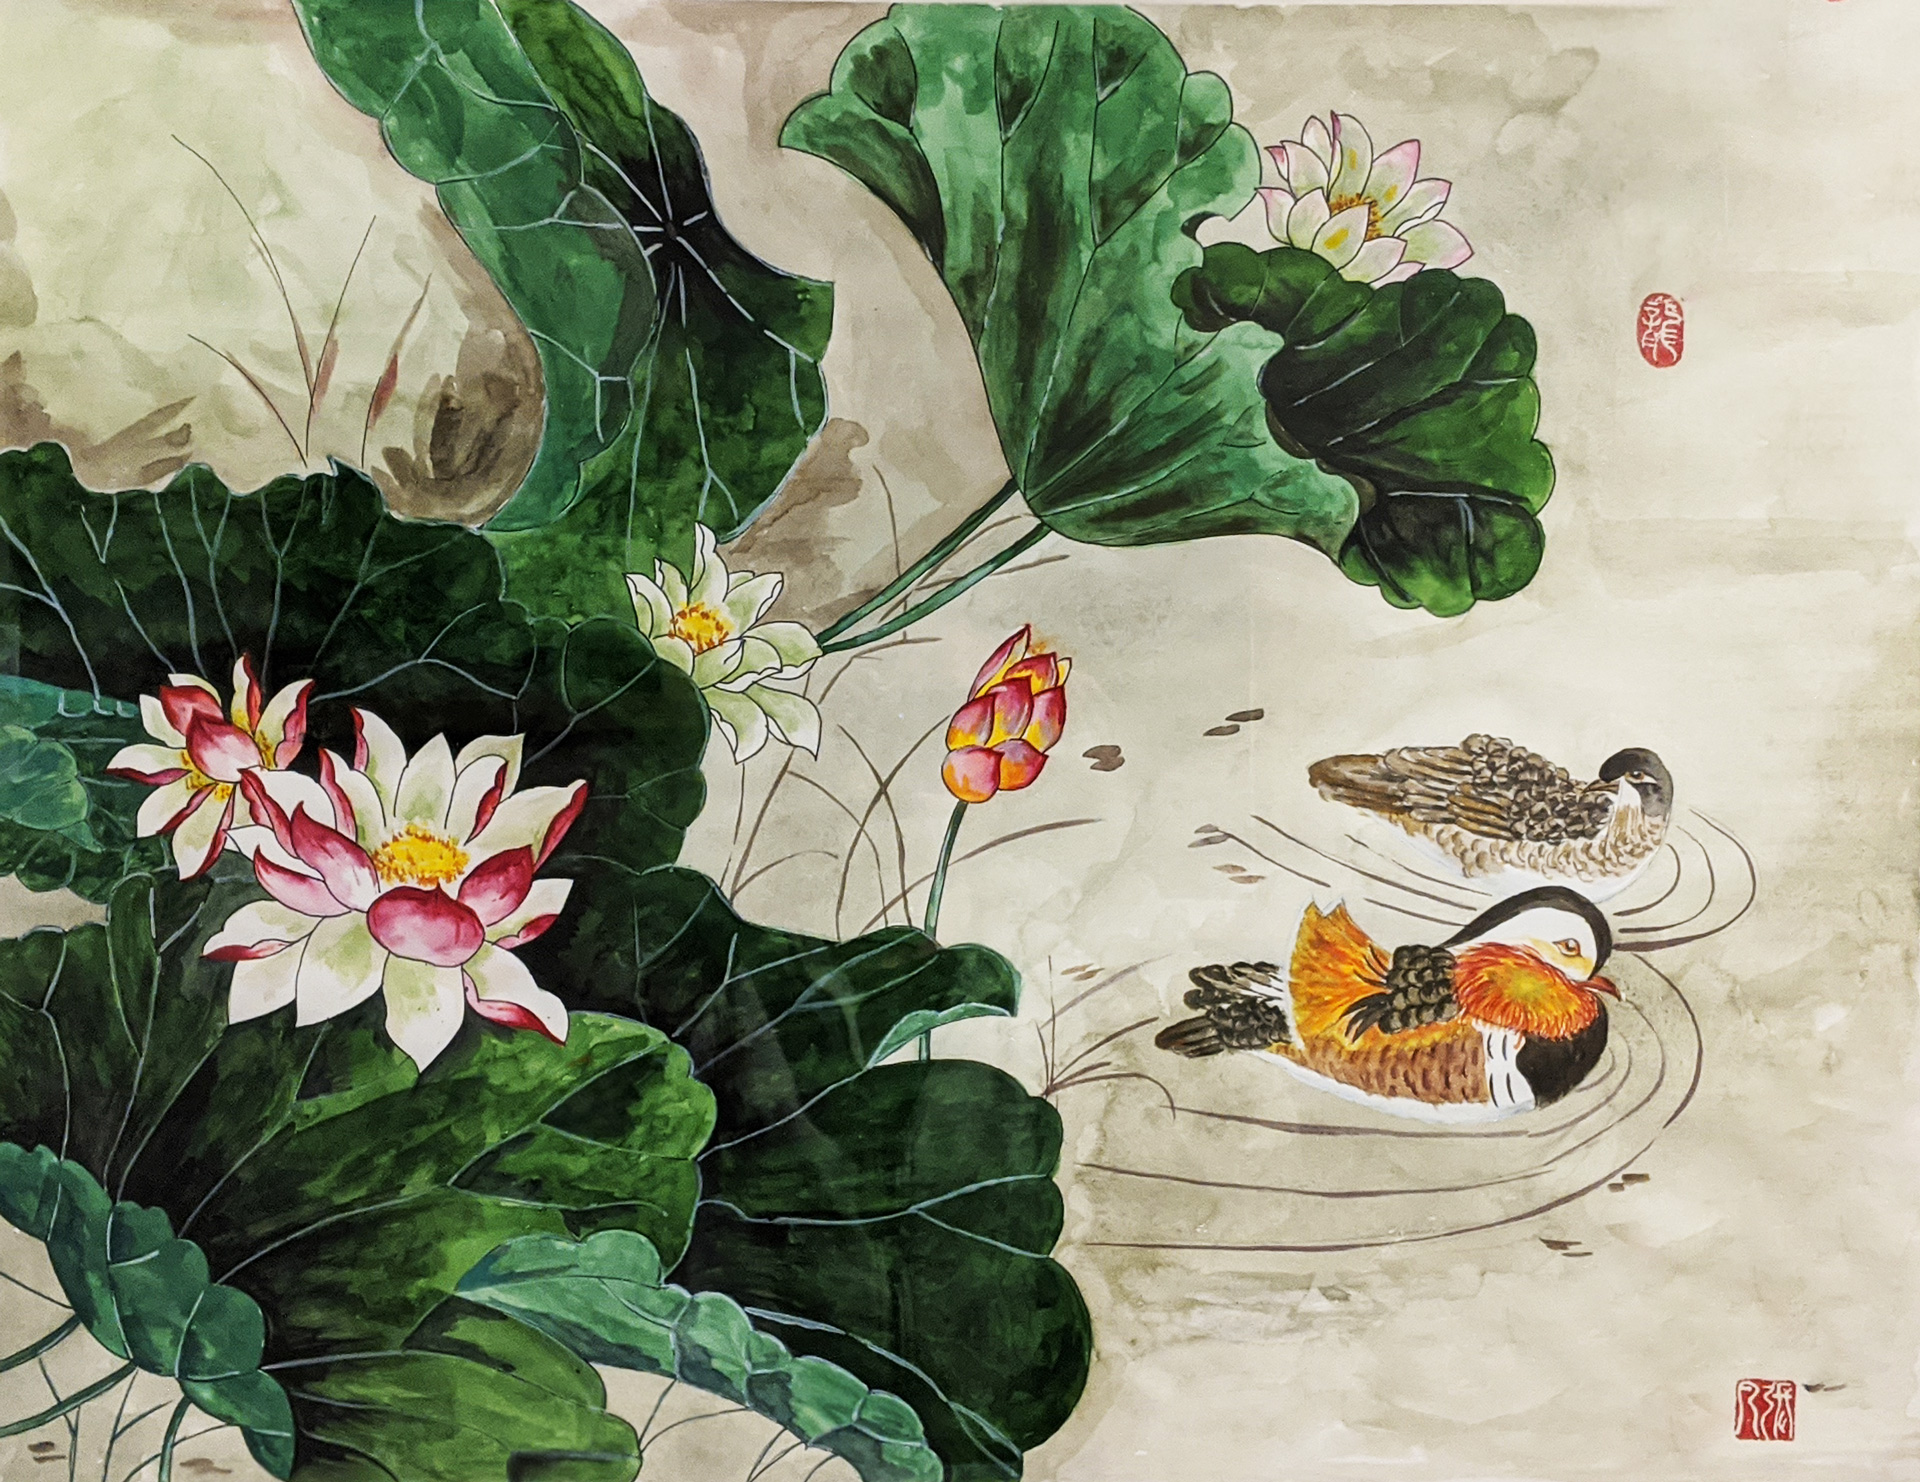 Moonlight over the Lotus Pond by Fan Stanbrough